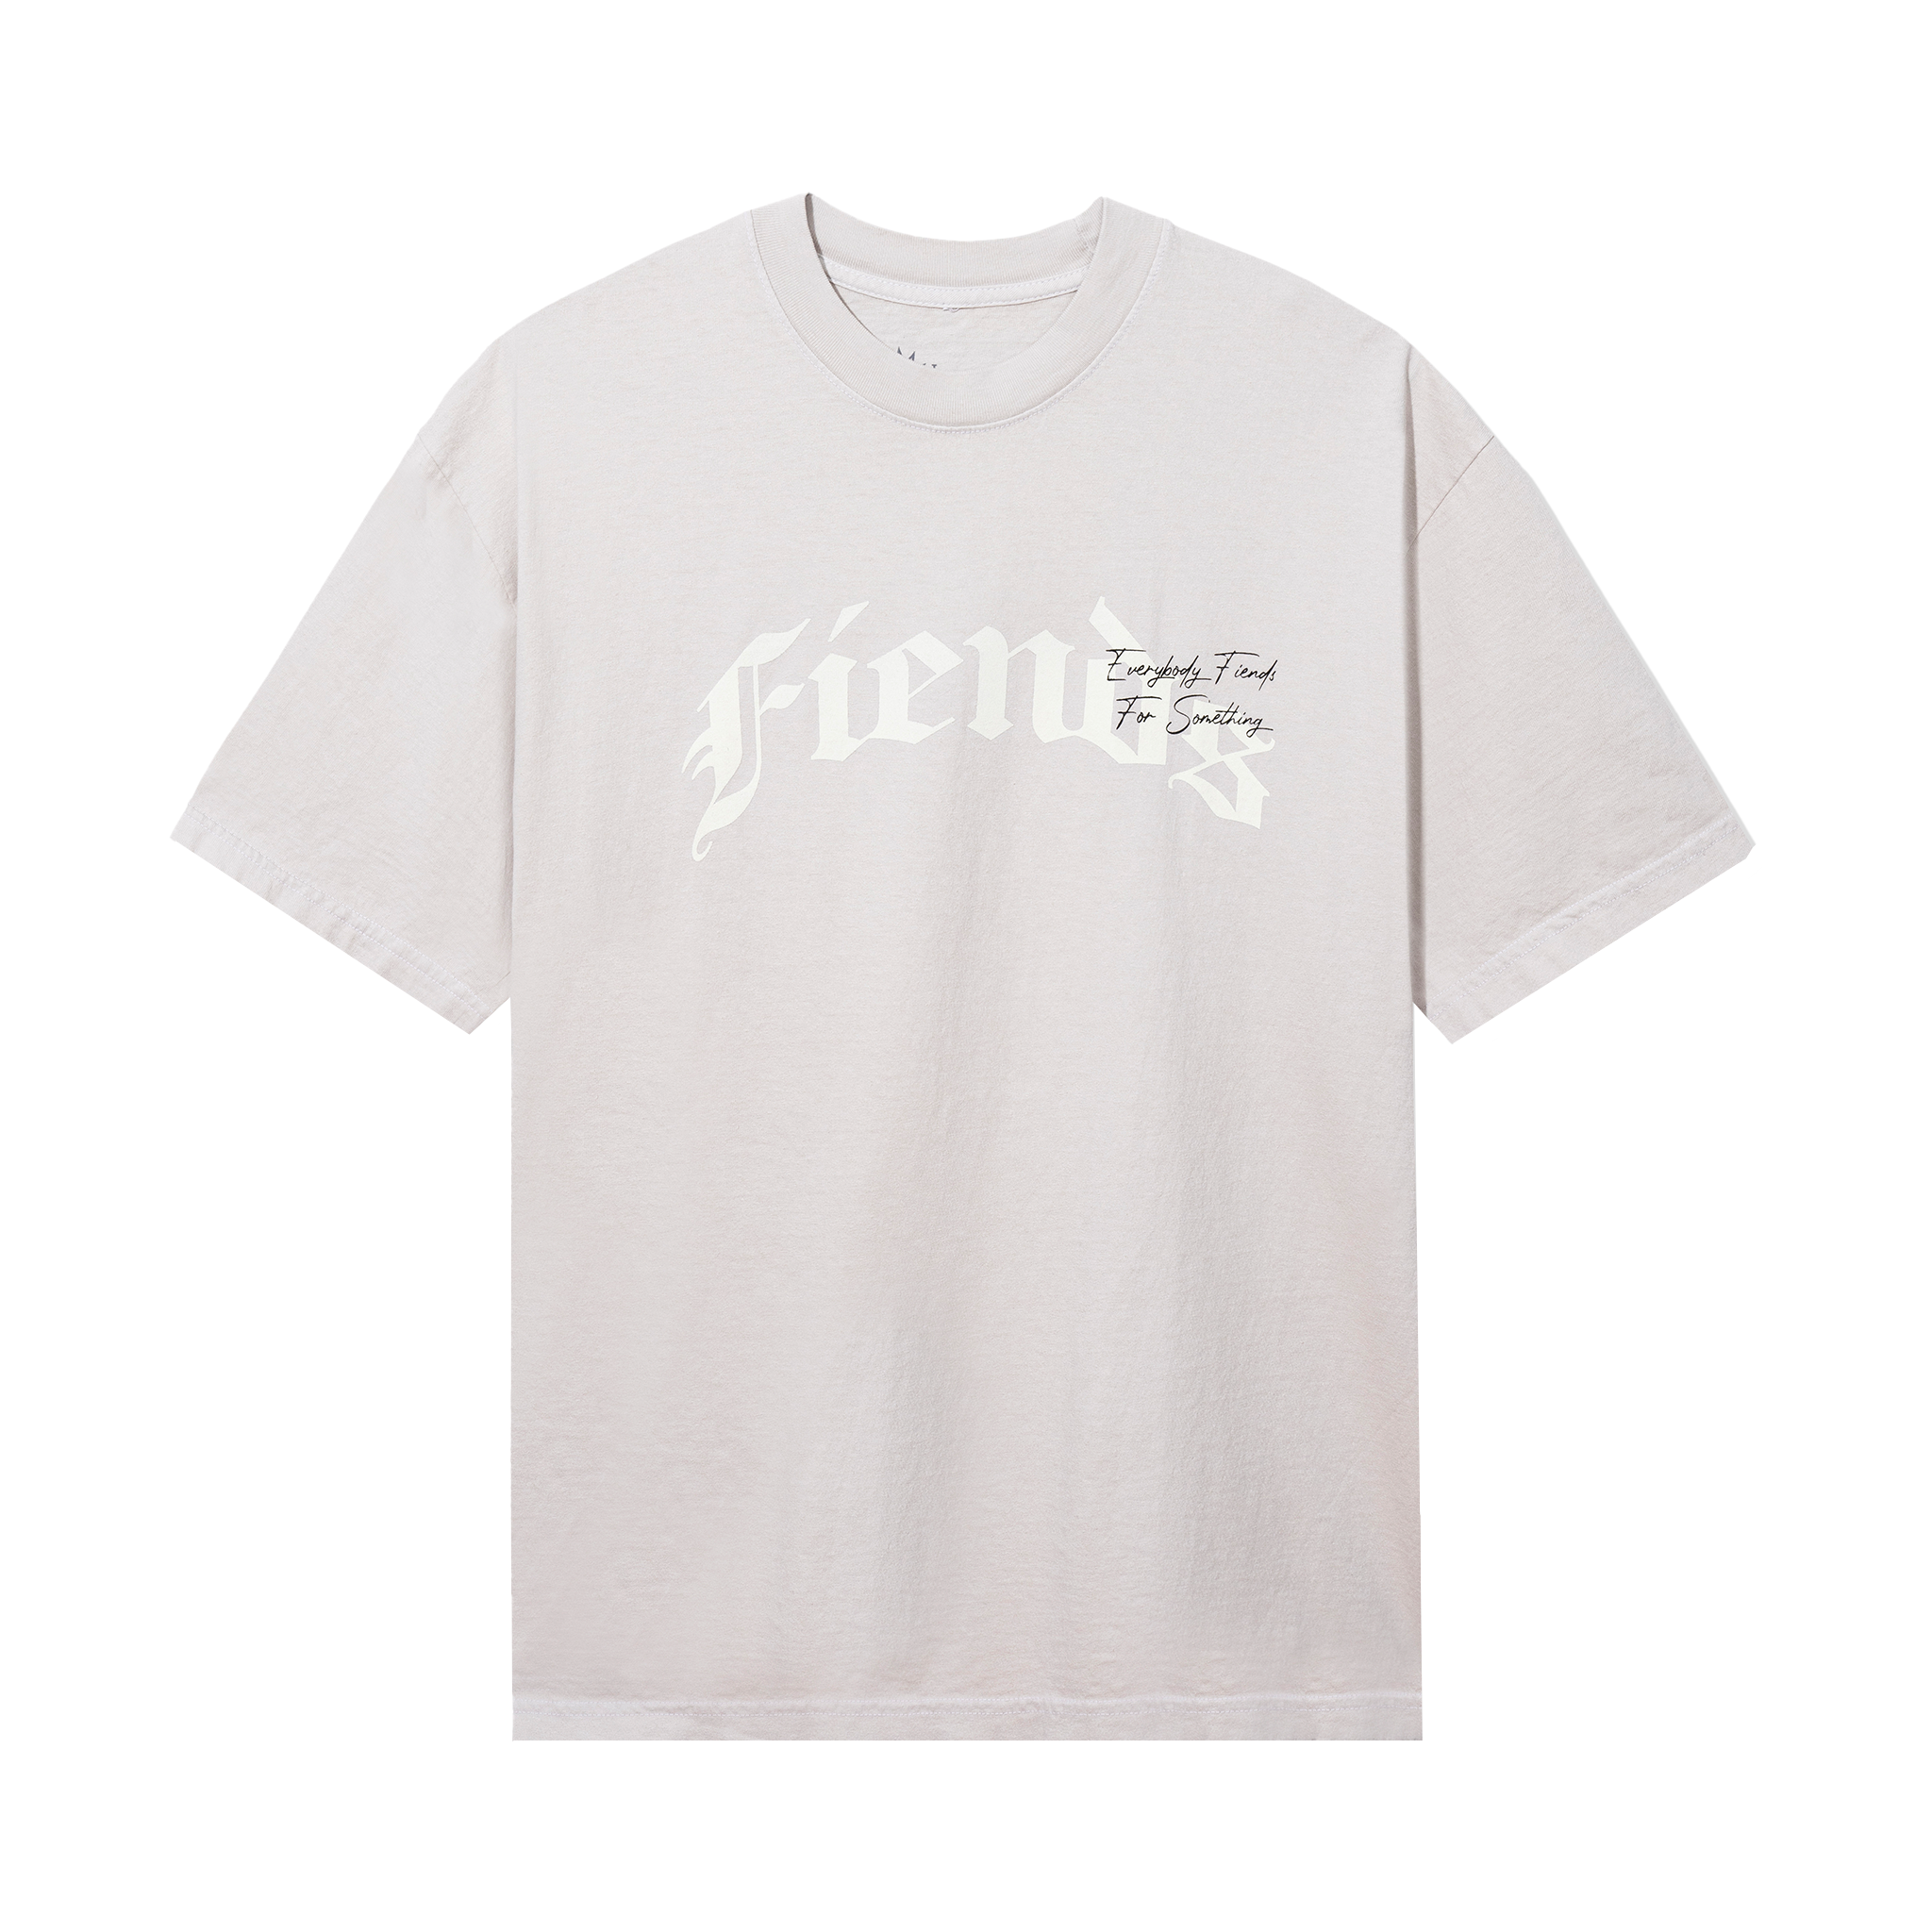 FIENDS Times Tee - Cement